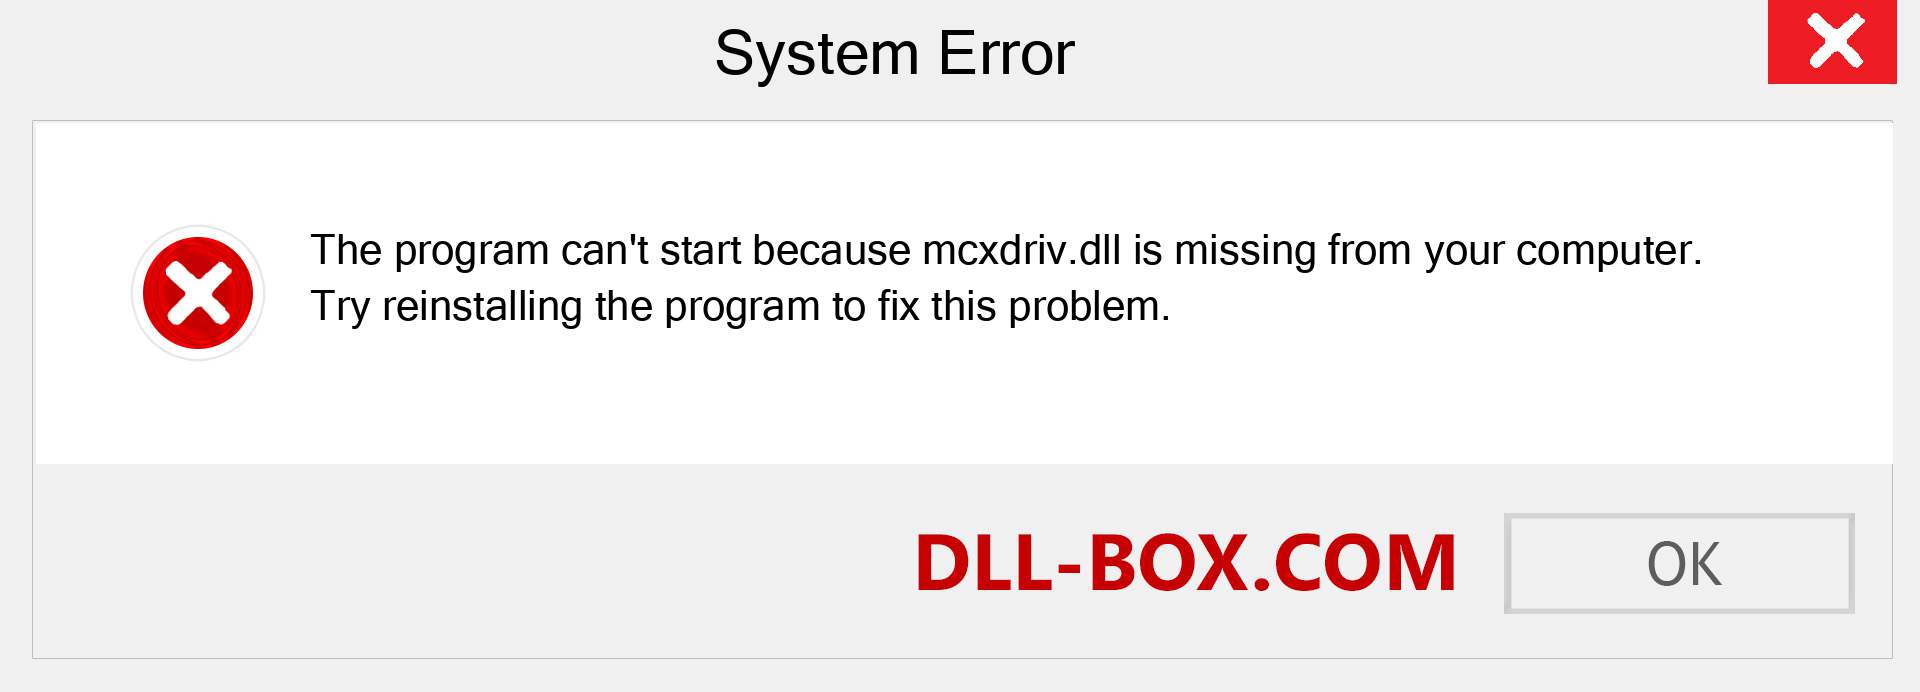  mcxdriv.dll file is missing?. Download for Windows 7, 8, 10 - Fix  mcxdriv dll Missing Error on Windows, photos, images